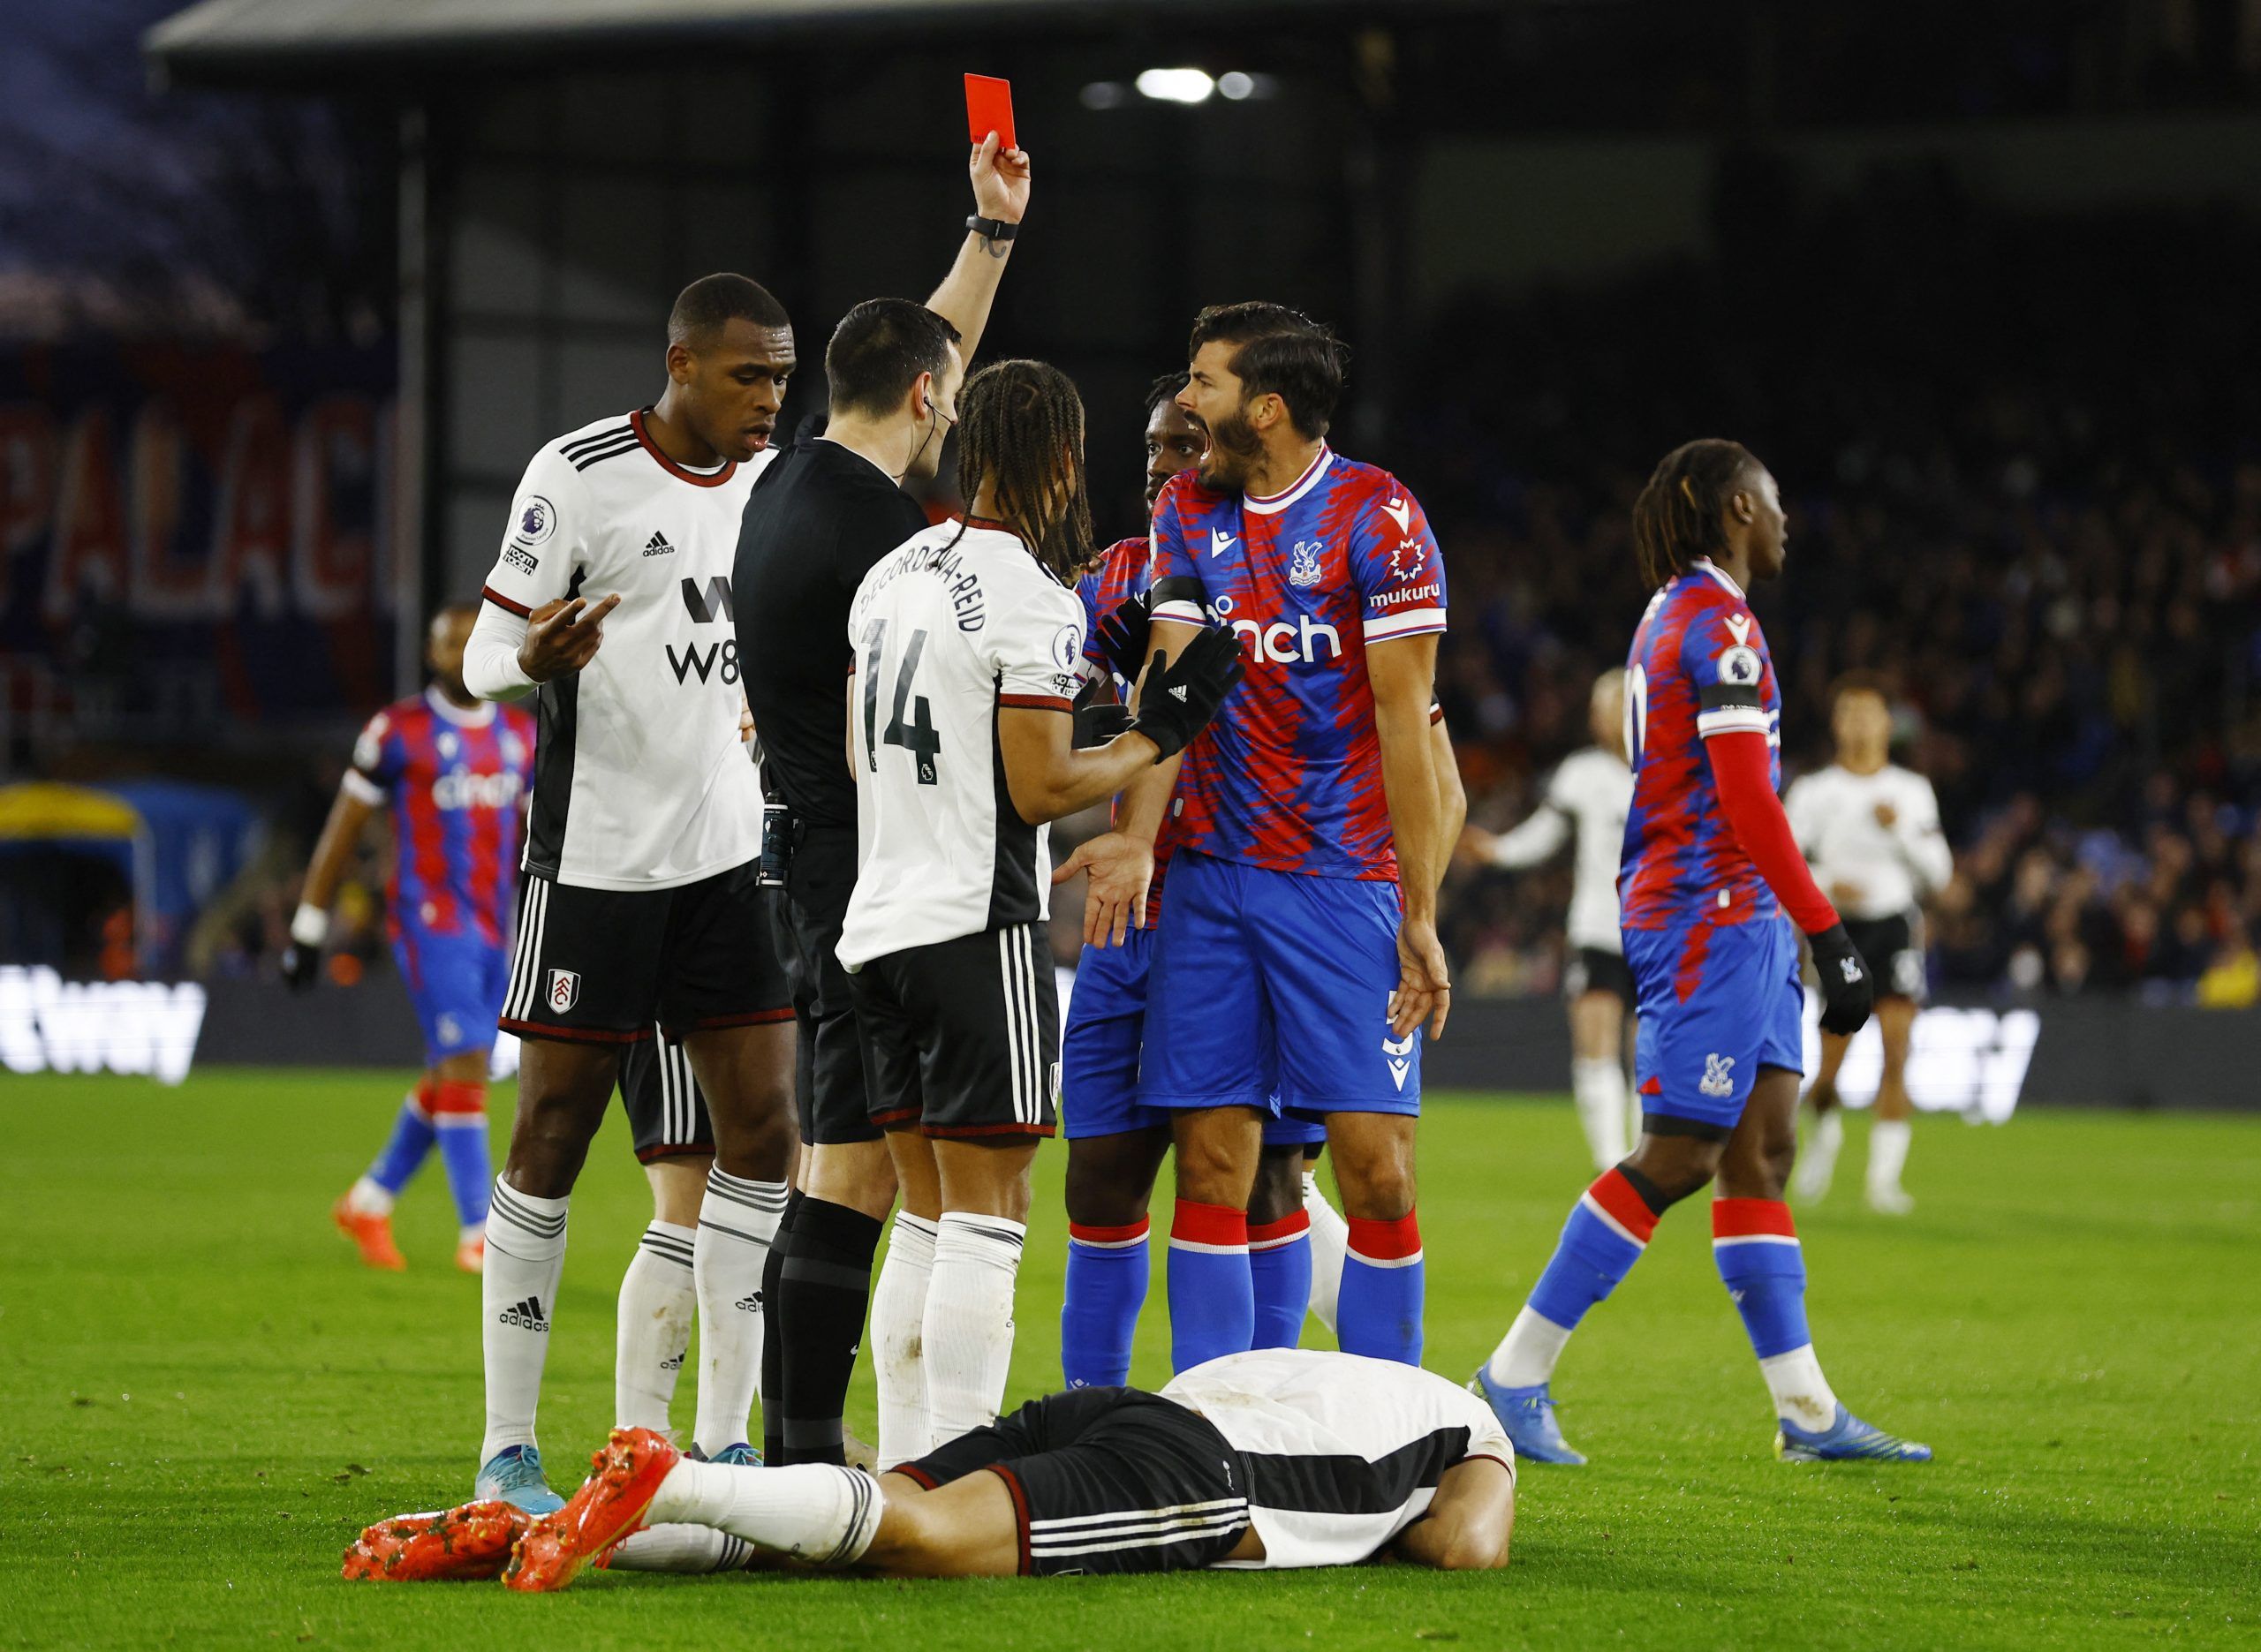 Soccer Football - Premier League - Crystal Palace v Fulham - Selhurst Park, London, Britain - December 26, 2022 Crystal Palace's James Tomkins is shown a red card by referee Andrew Madley Action Images via Reuters/Peter Cziborra EDITORIAL USE ONLY. No use with unauthorized audio, video, data, fixture lists, club/league logos or 'live' services. Online in-match use limited to 75 images, no video emulation. No use in betting, games or single club /league/player publications.  Please contact your a